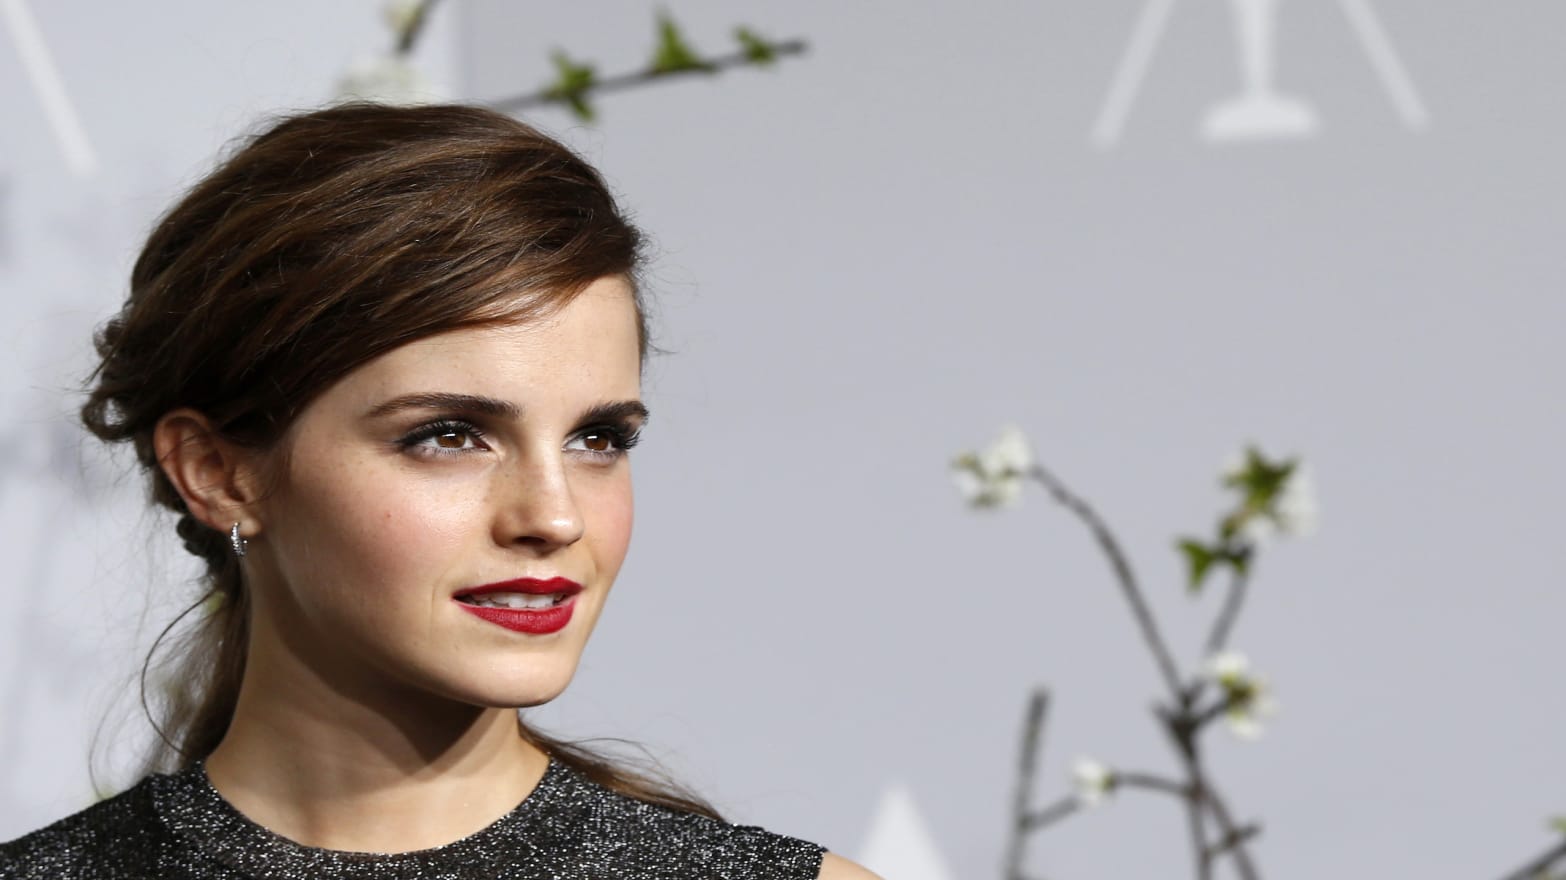 Emma Watson Opens Up About Feminism That Horrific Nude Photo Hoax And